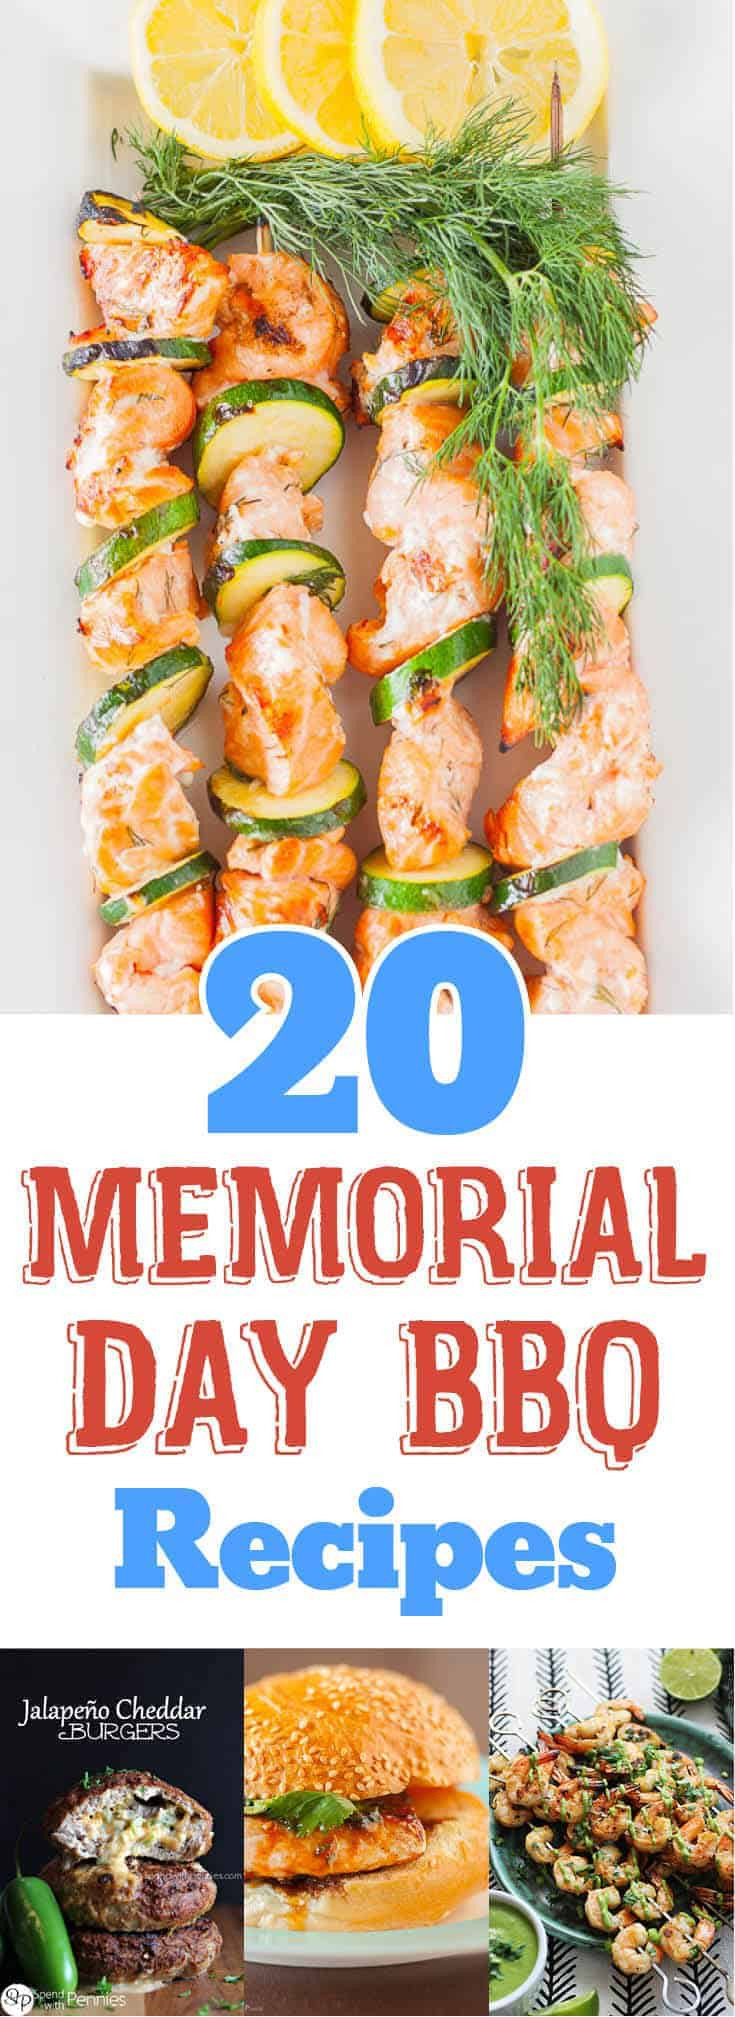 Memorial Day Barbeque Ideas
 20 Recipe Ideas for Memorial Day Barbecue Plating